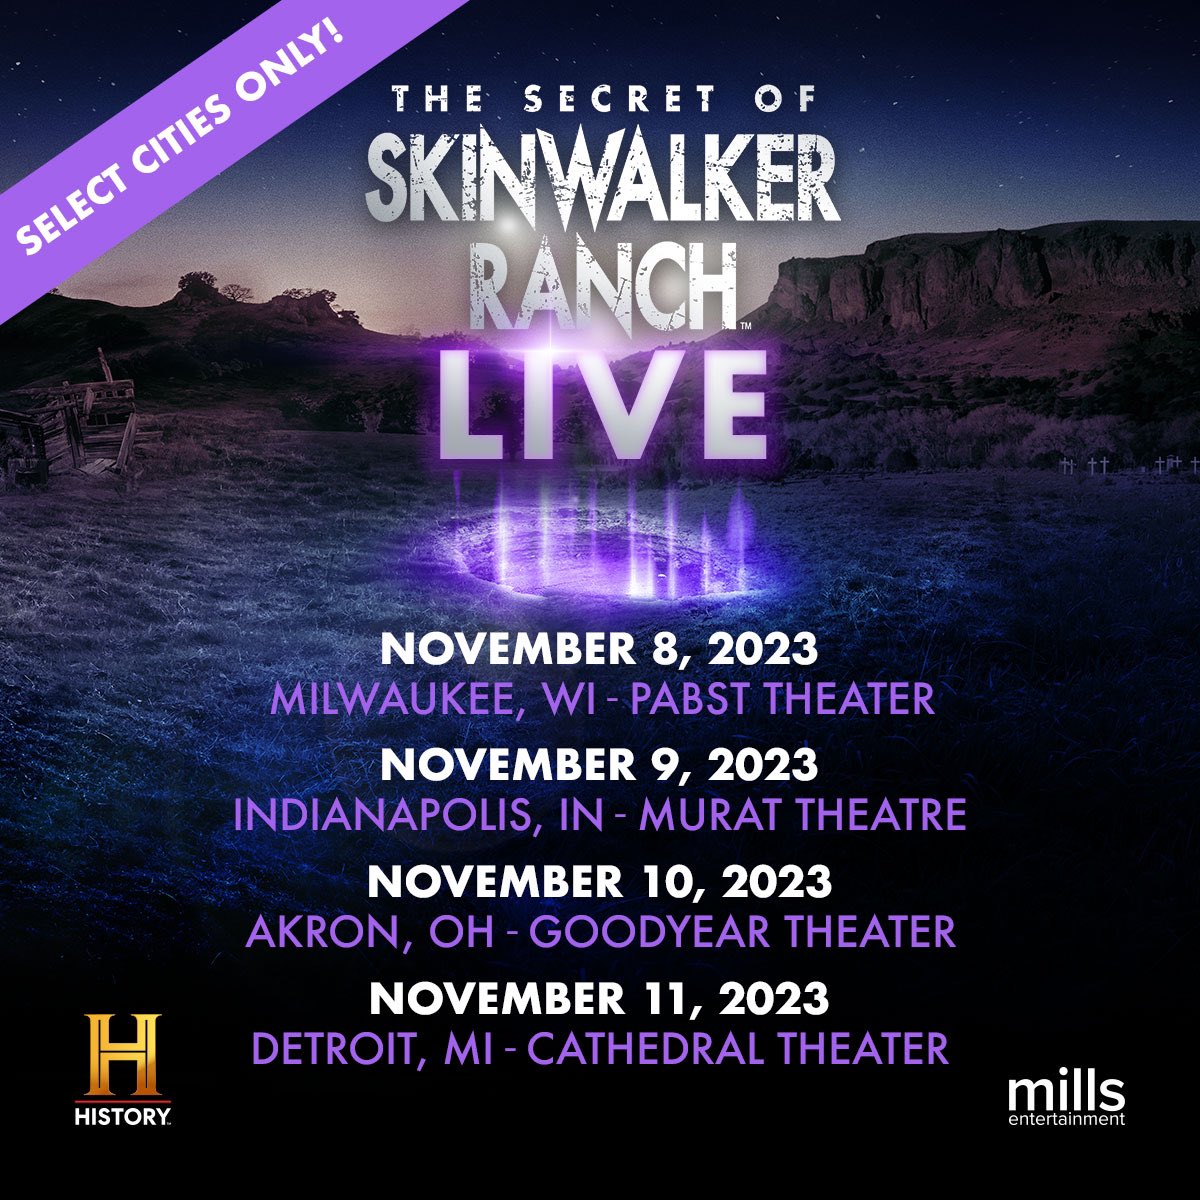 What are you waiting for? This is the only time you will be able to see this tour live - don’t wait! #skinwalkerranch #thesecretofskinwalkerranchlivetour thesecretofskinwalkerranchlive.com